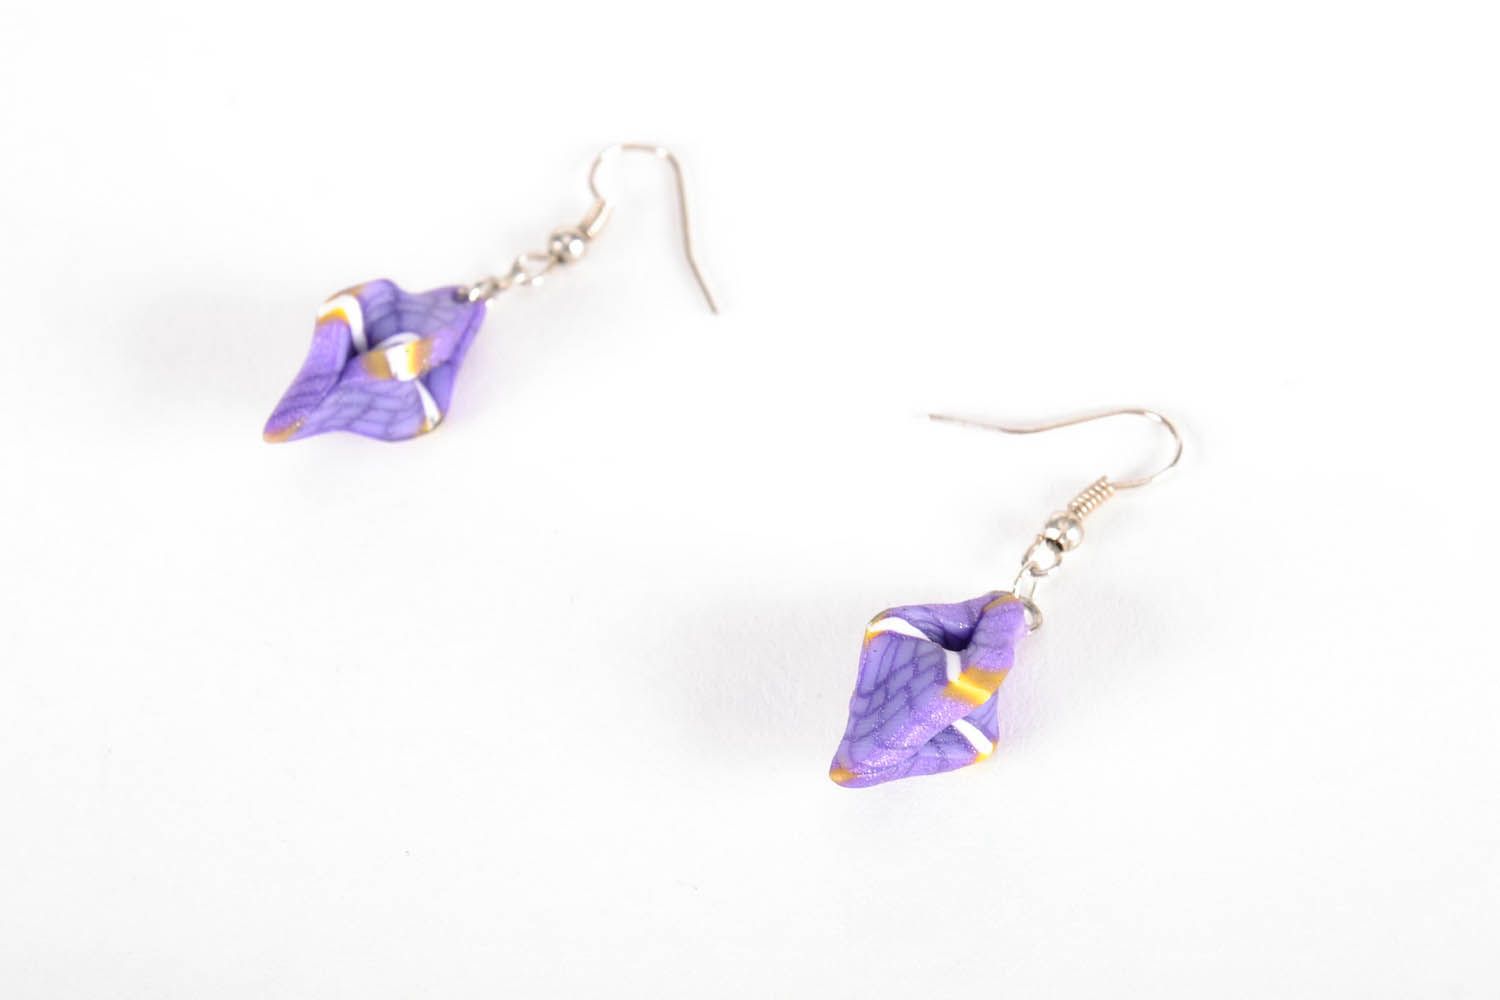 Violet earrings made of polymer clay photo 1